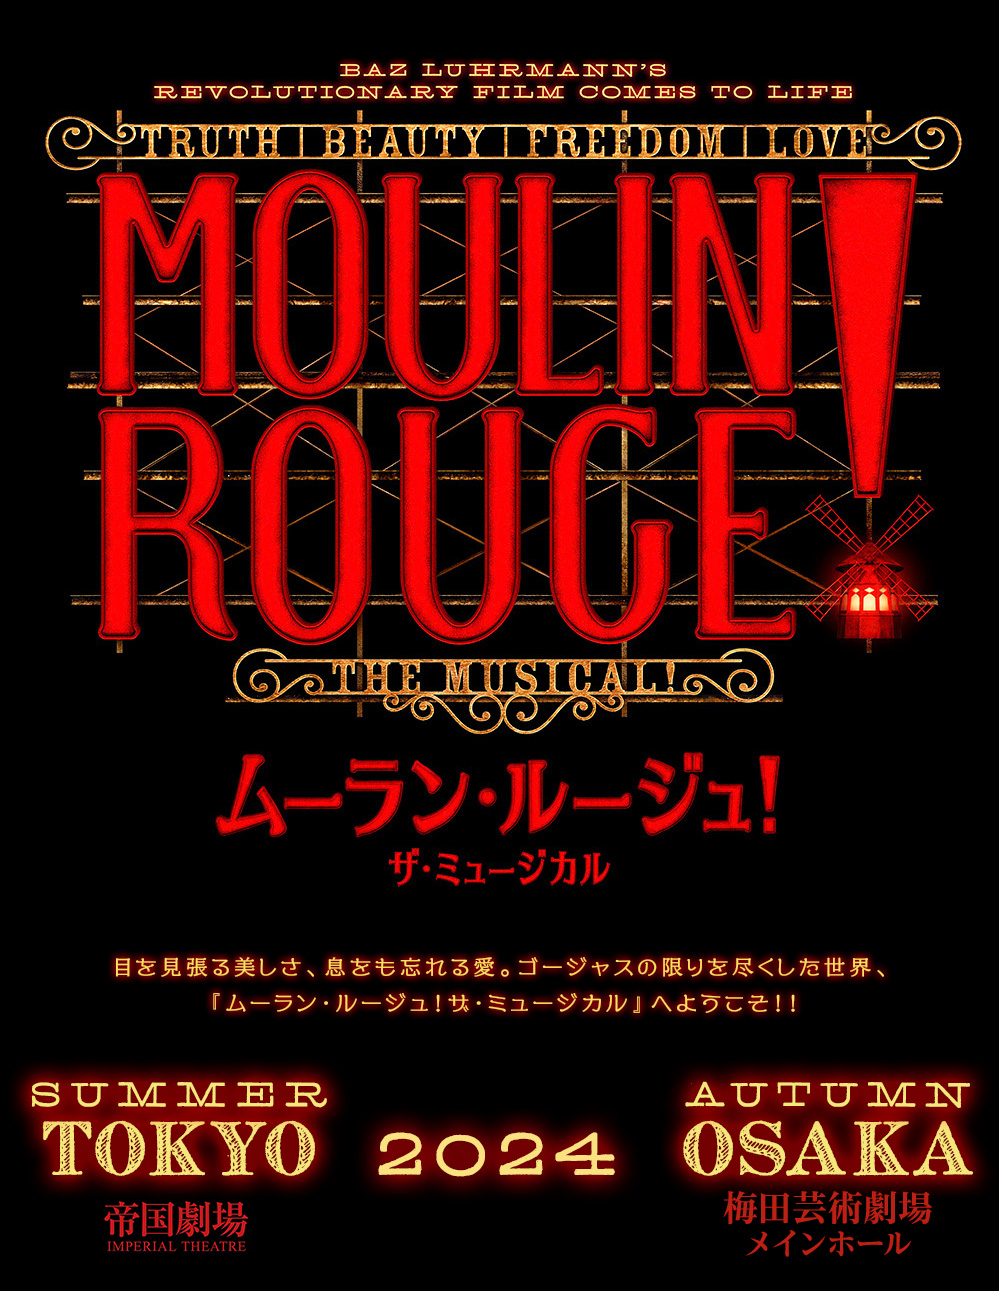 Tokyo - Home - Moulin Rouge! The Musical 『ムーラン・ルージュ！ザ